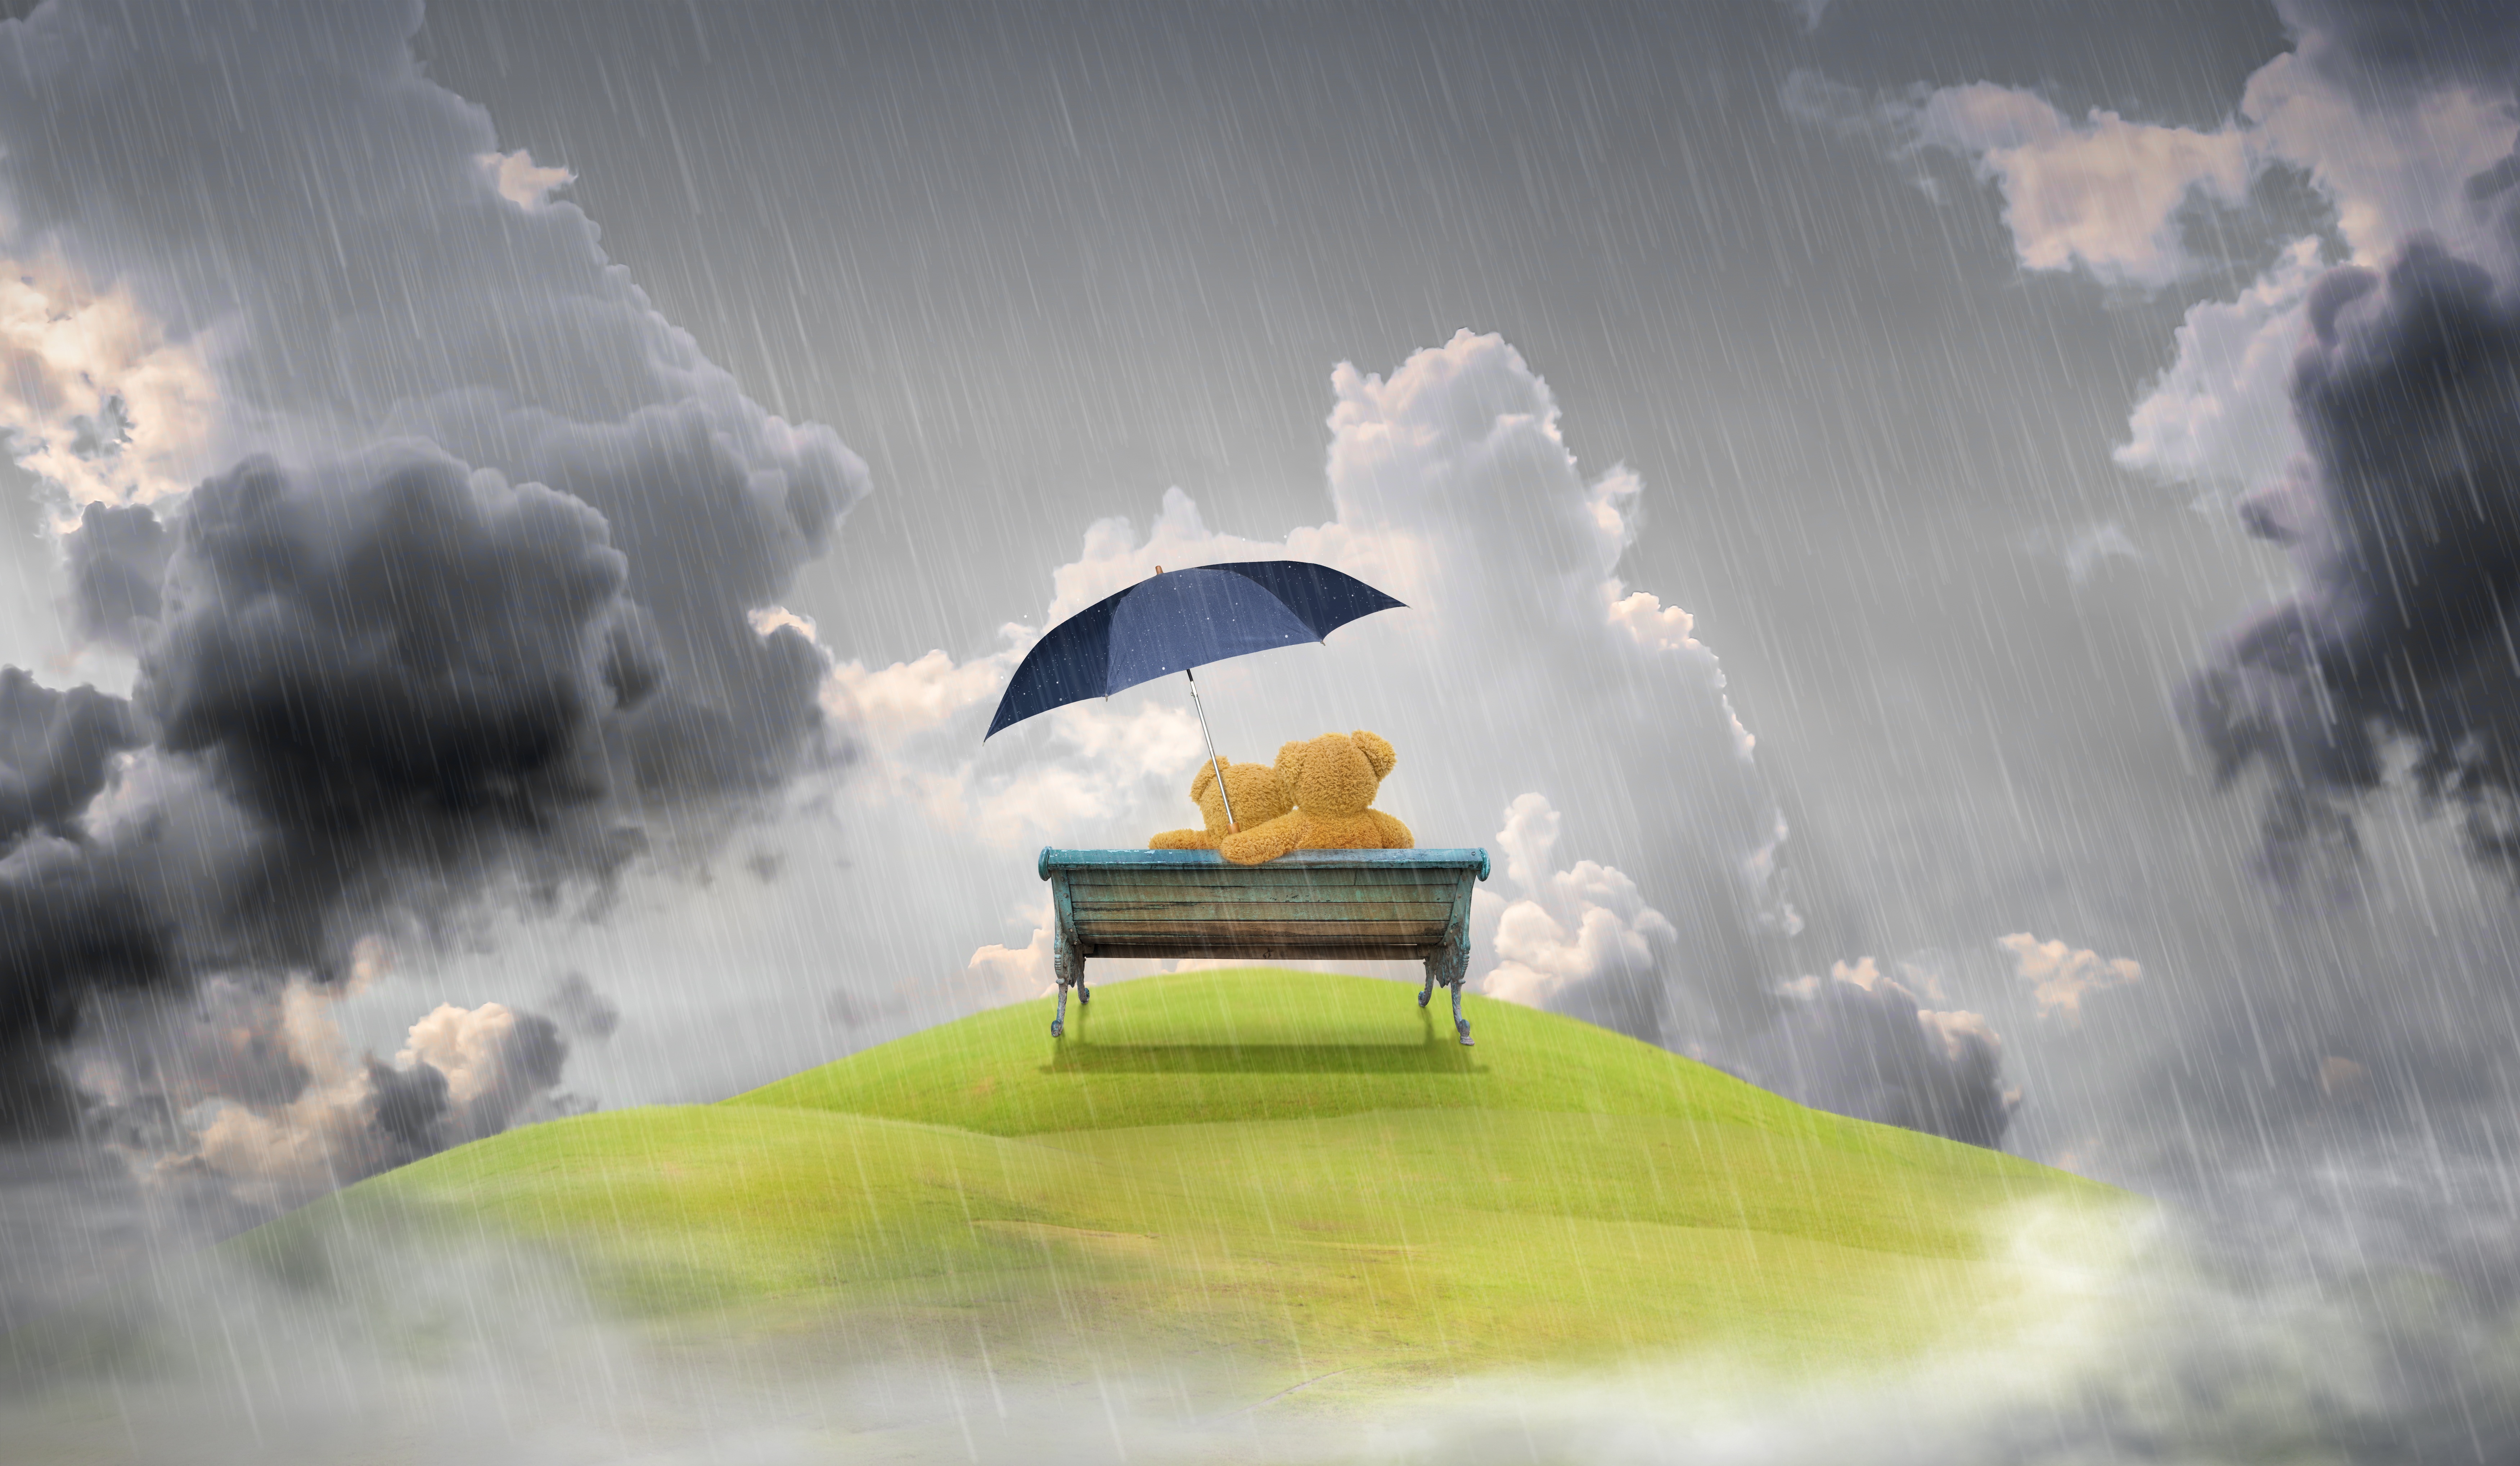 116958 download wallpaper rain, love, teddy bear, bench screensavers and pictures for free